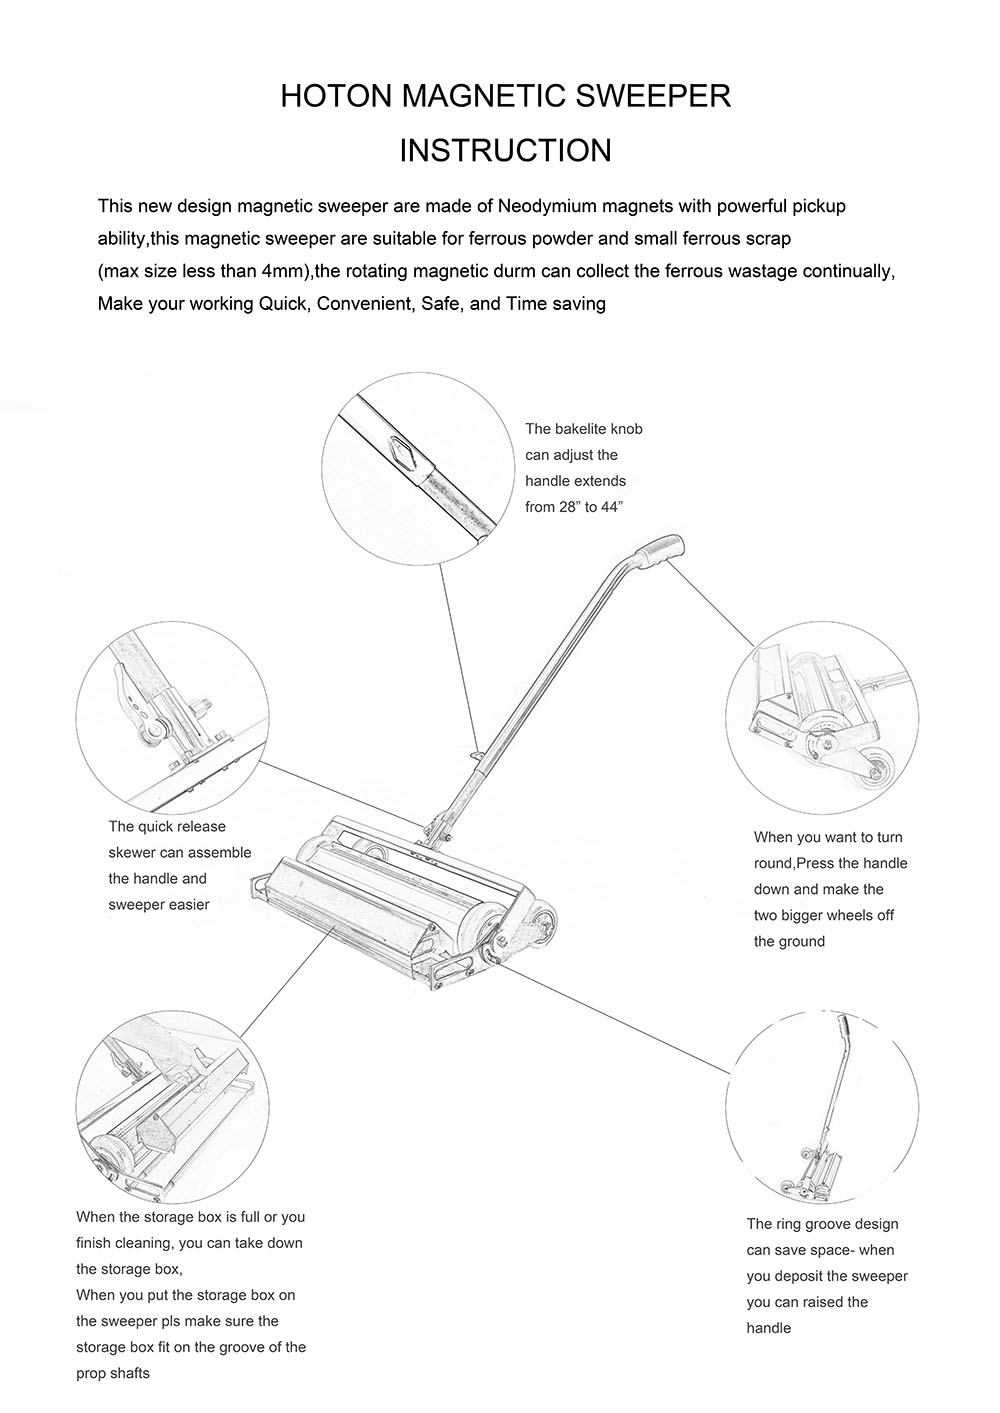 English Operating Instructions for Magnetic Sweepers